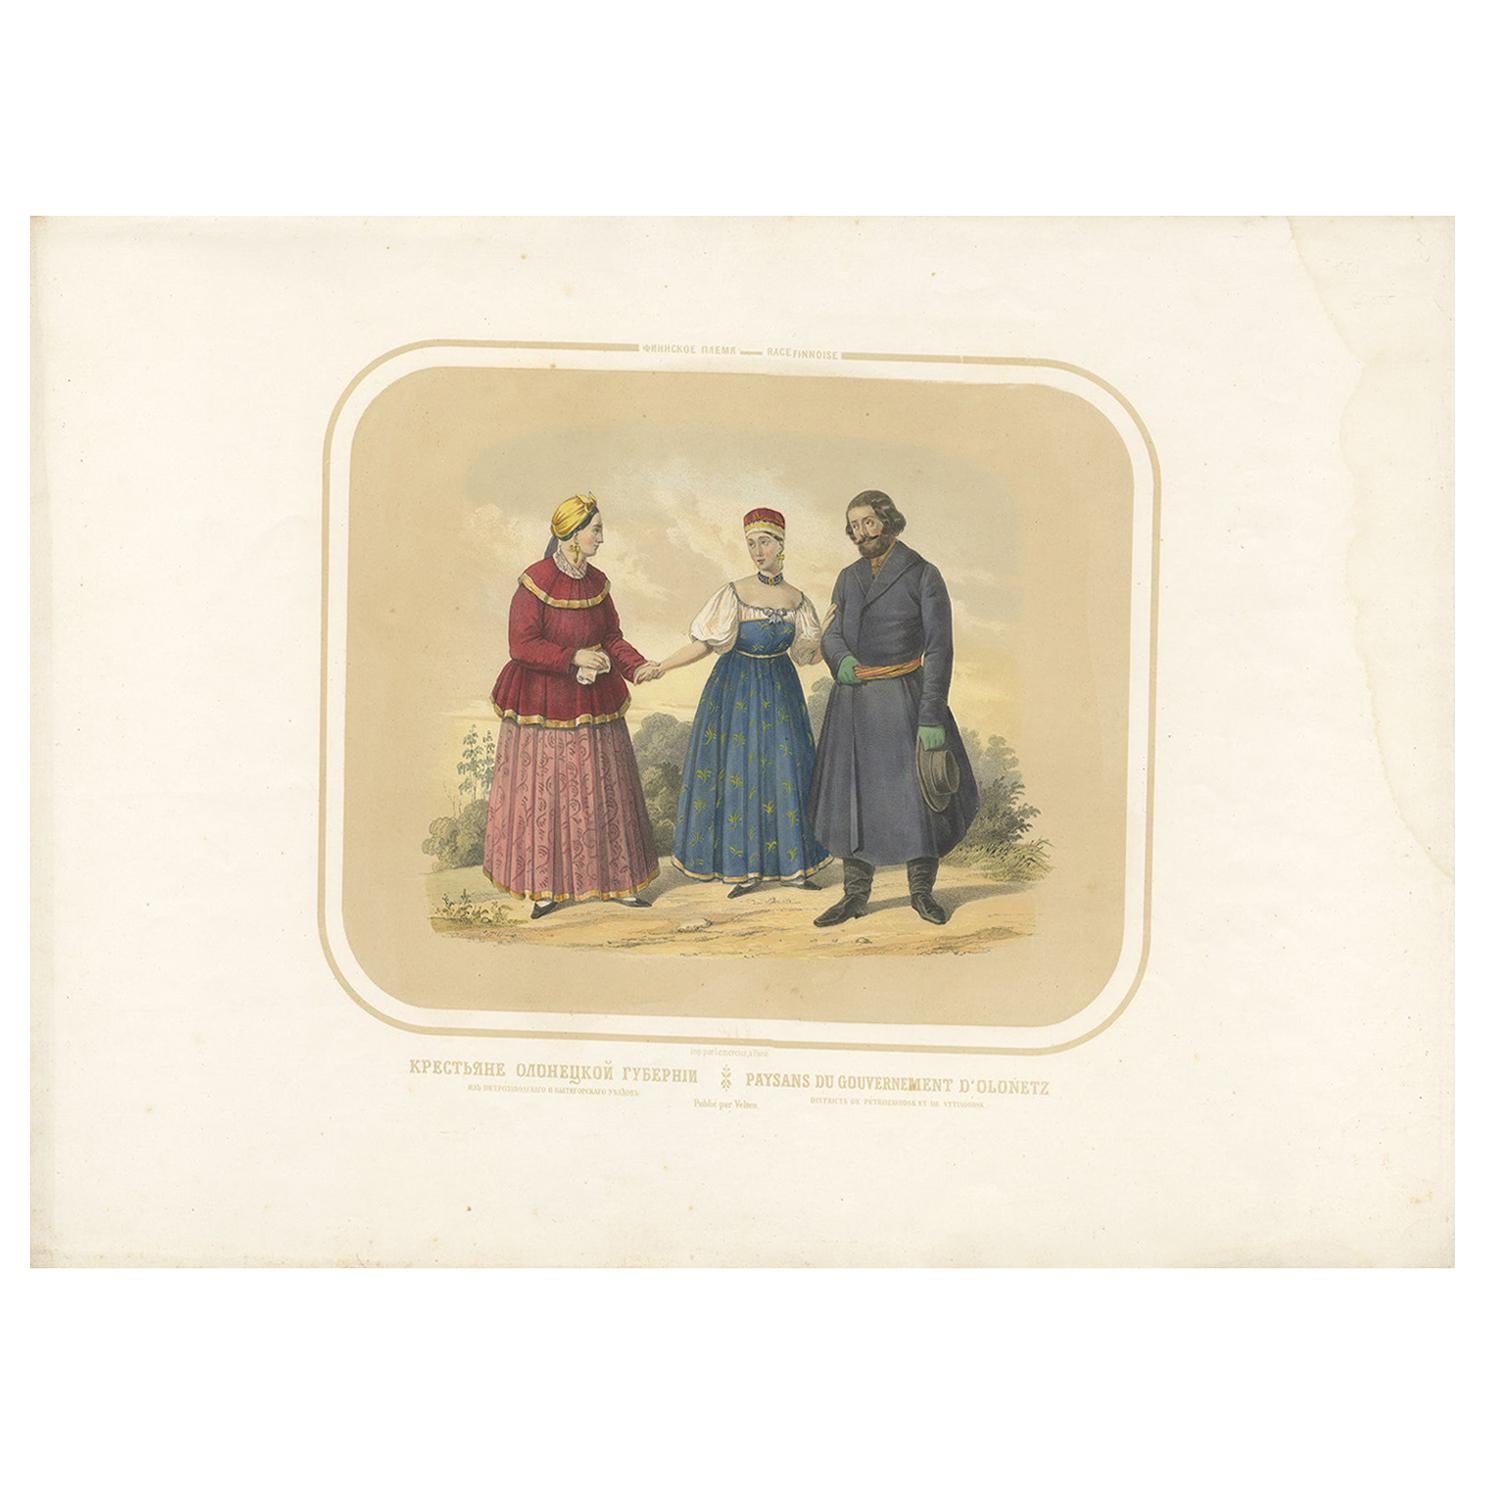 Antique Costume Print of Peasants from Olonets in Russia, circa 1860